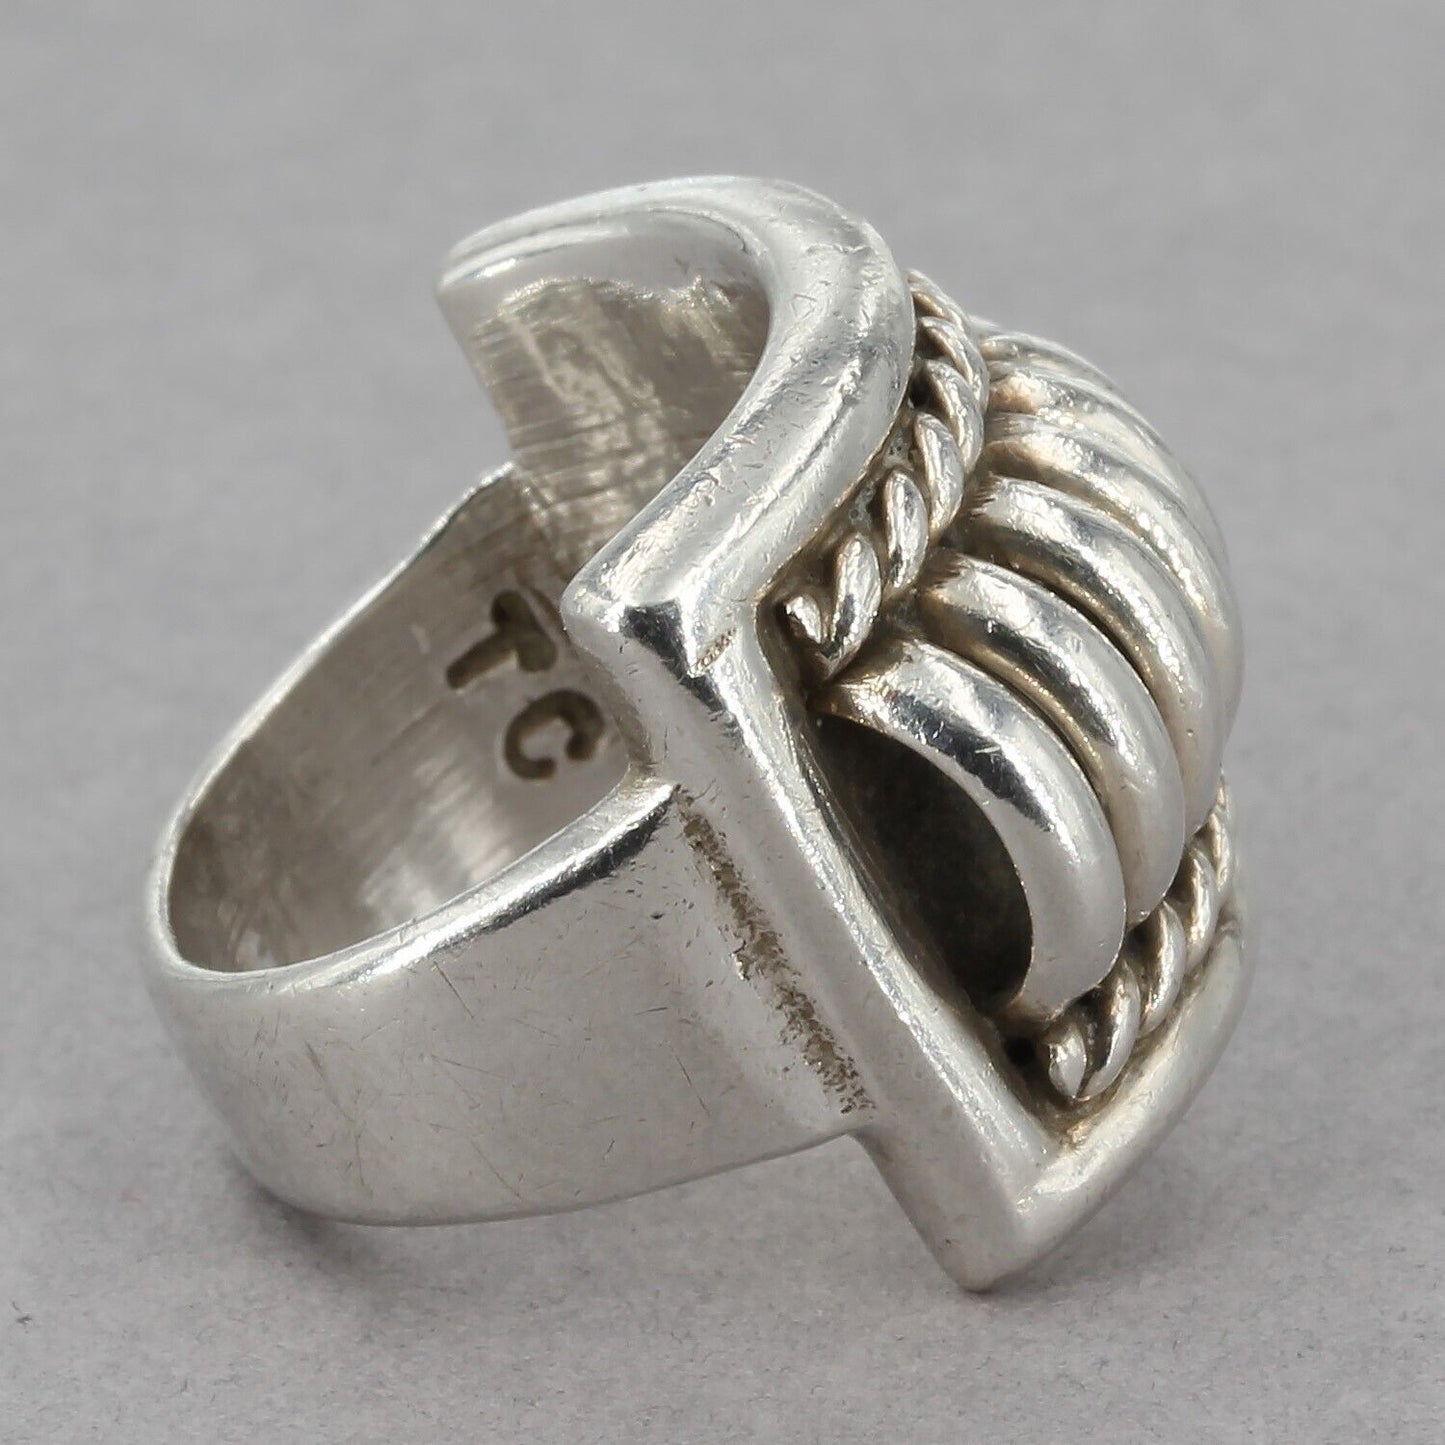 Native American Handcrafted Navajo Thomas Charley Sterling Silver Ring Size 5.75